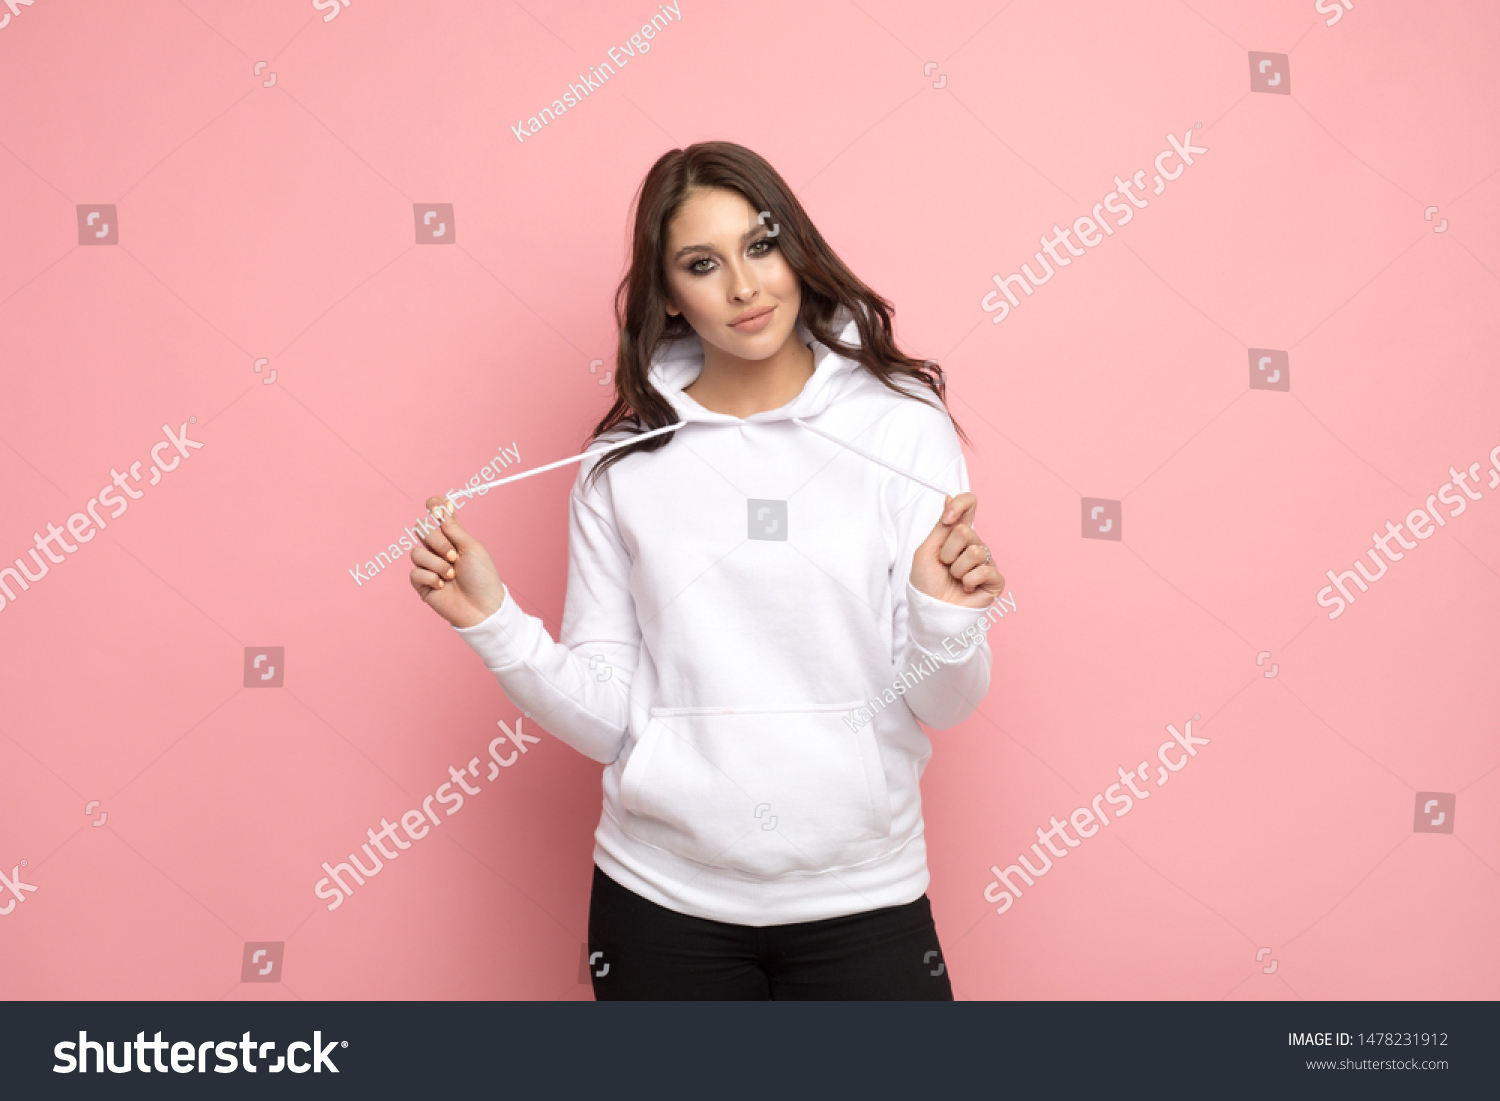 Attractive young woman in a white hoodie. Mock-up. #1478231912